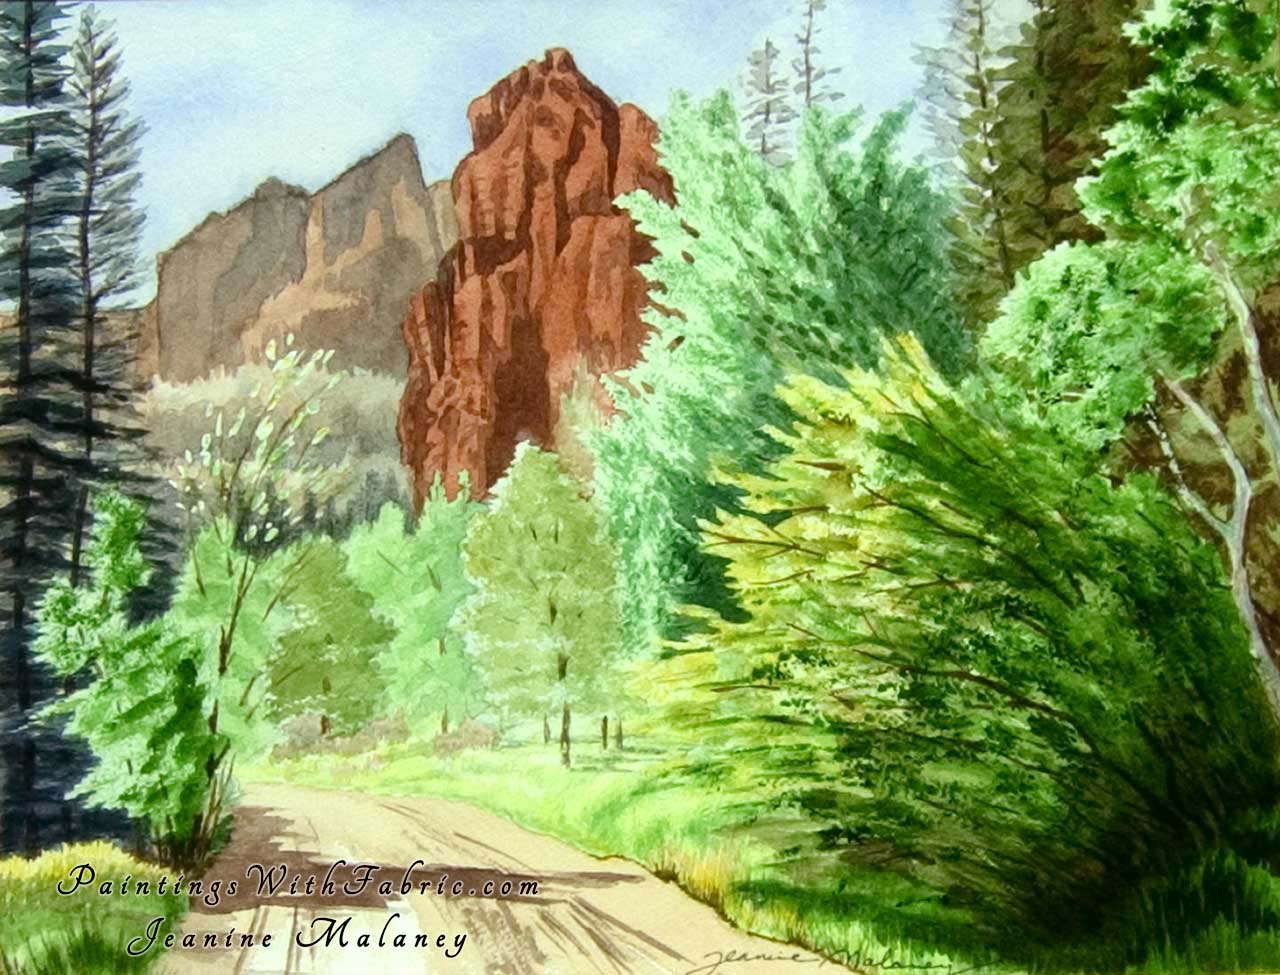 On the Road to Piedra Falls Unframed Original Watercolor Painting of a forest road